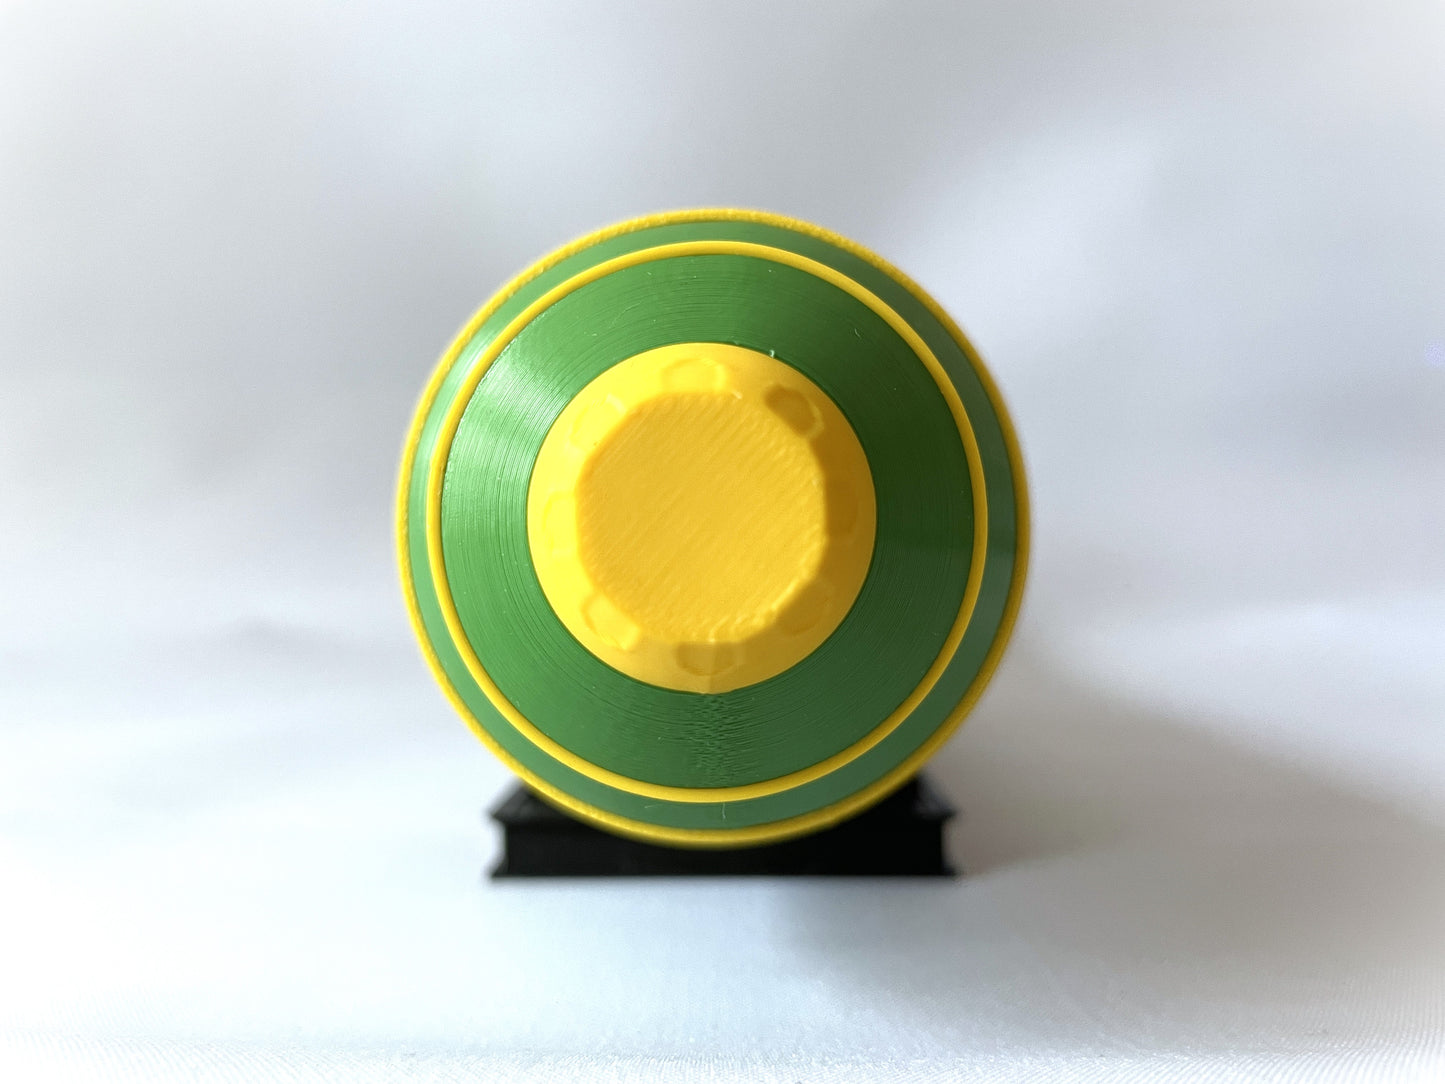 1:24 Scale Mark 17 Thermonuclear Gravity Bomb, Hydrogen Nuke Atom Atomic 3D Printed